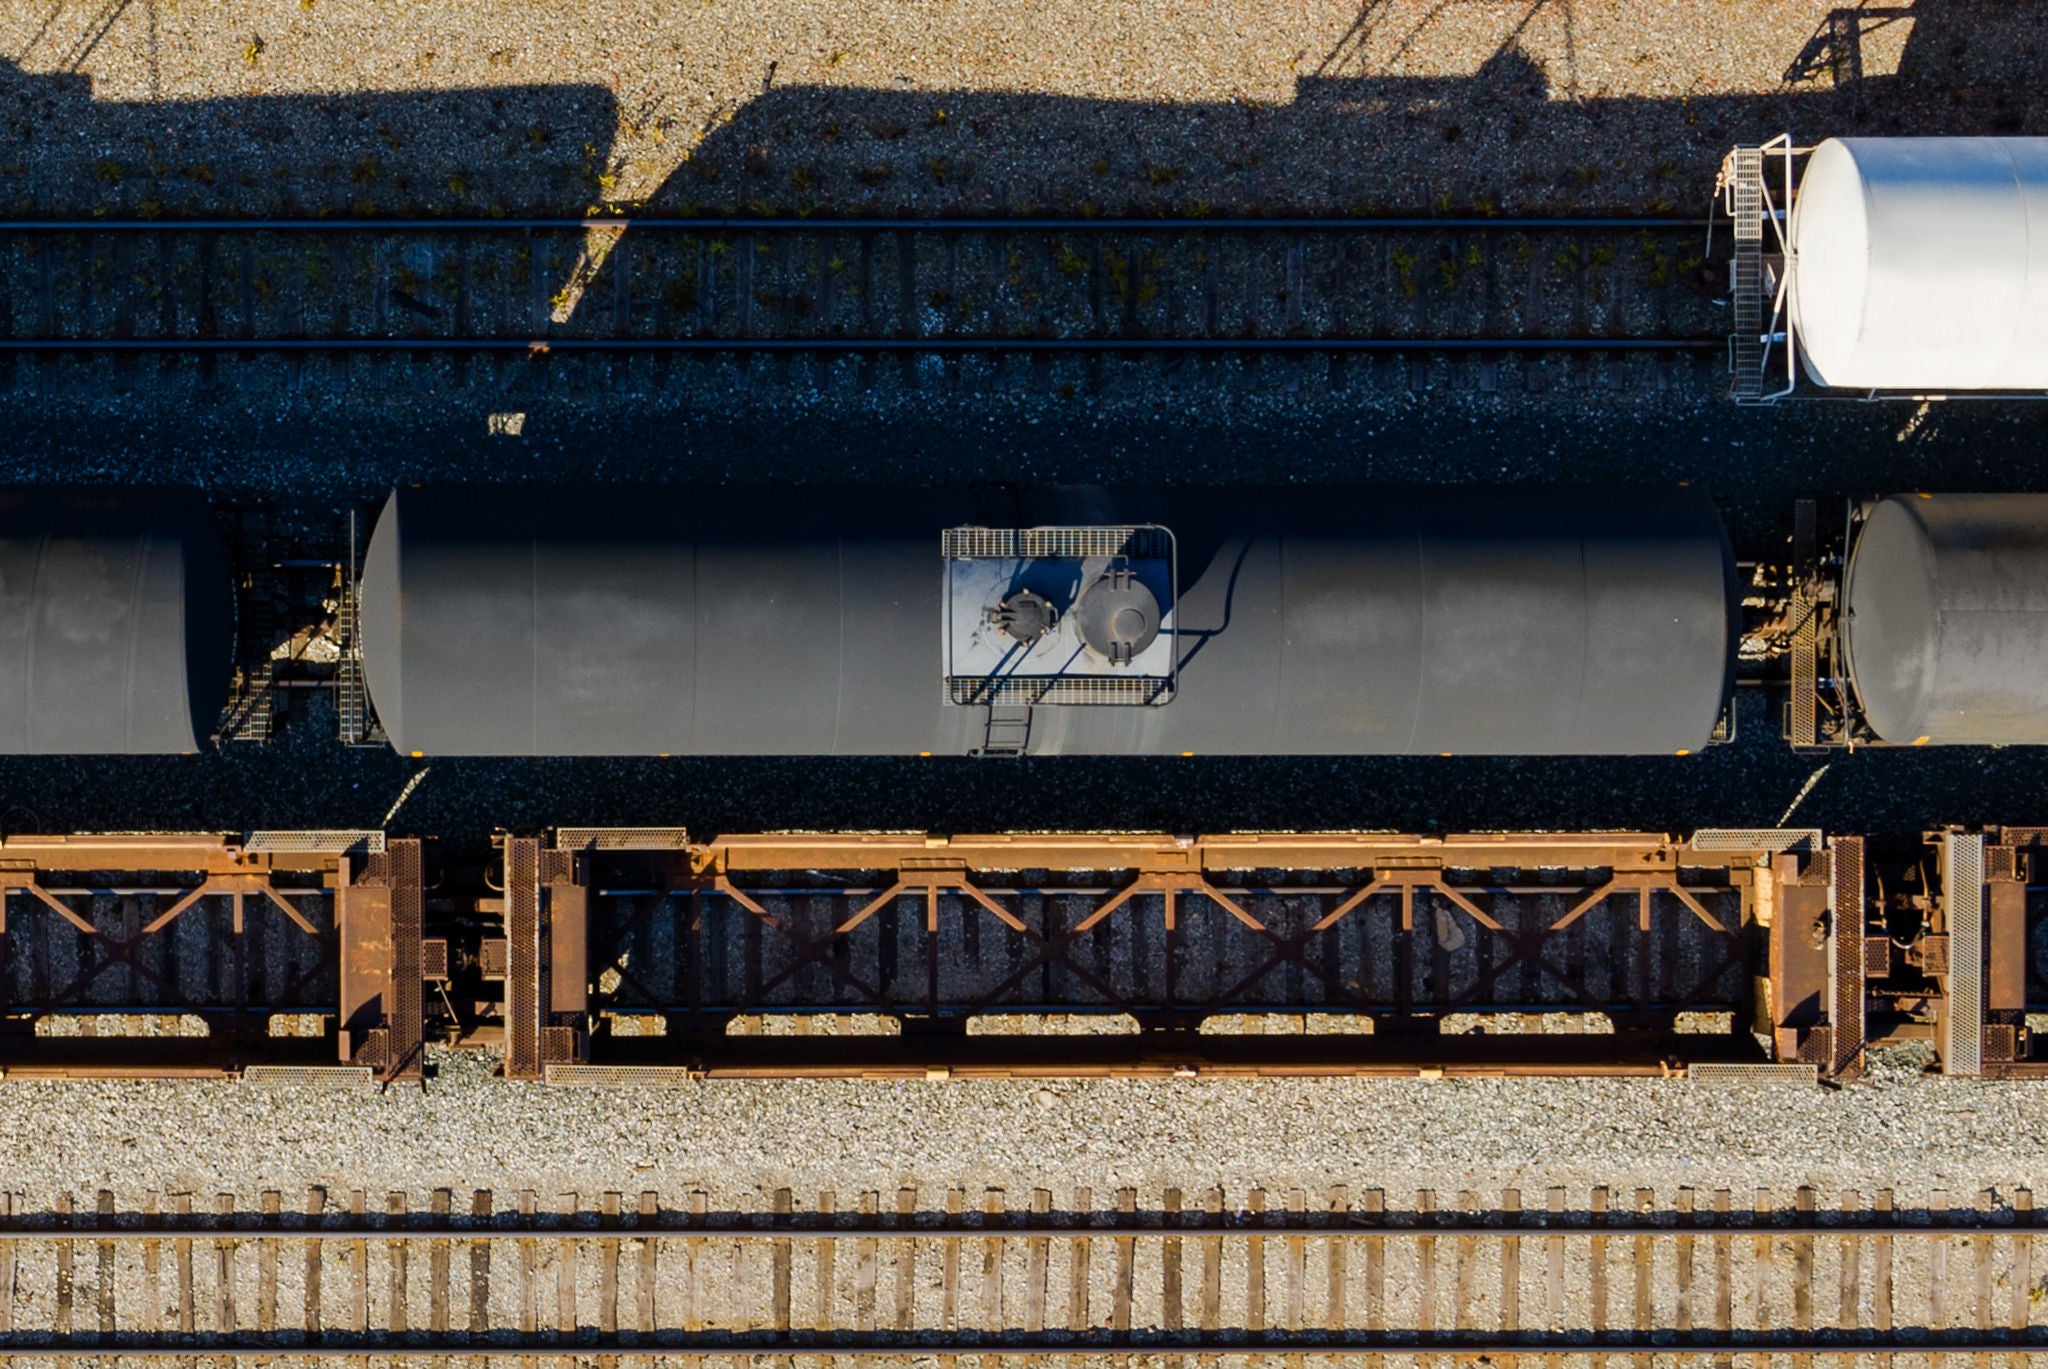 Aerial view of black tank car on a track representing ways to help find your shipping industry